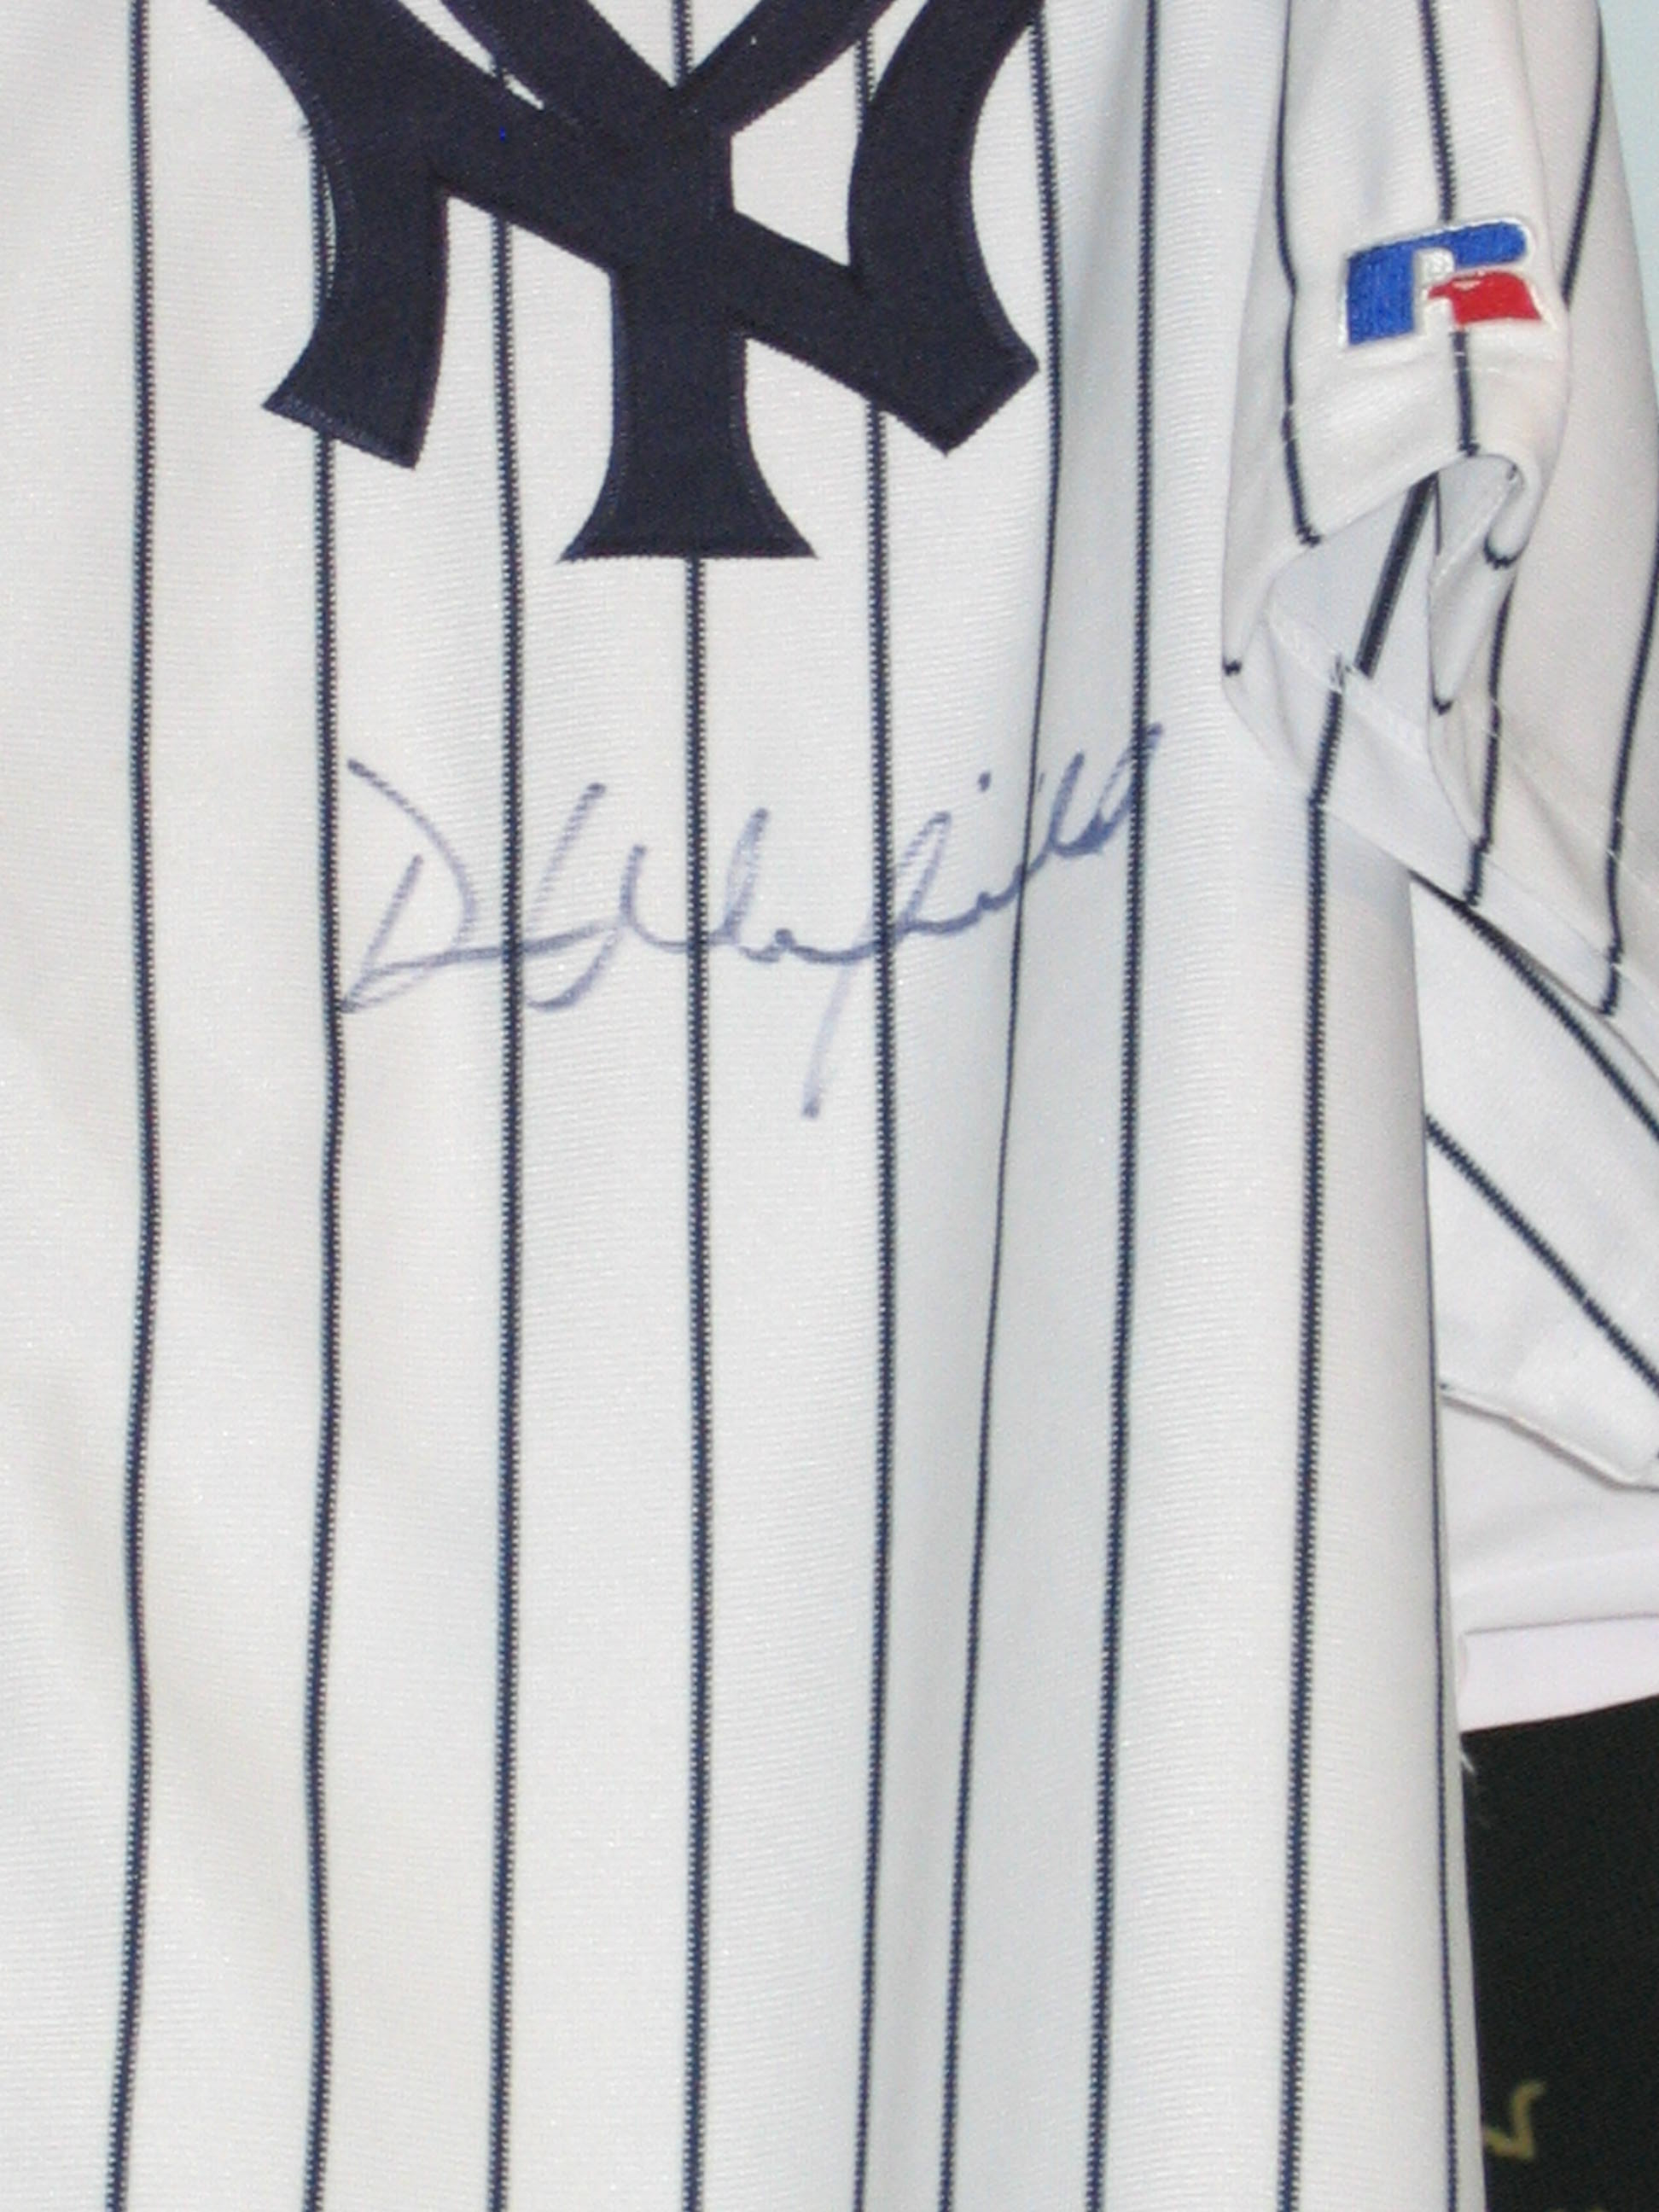 Dave Winfield Autographed Jersey (New York Yankees)